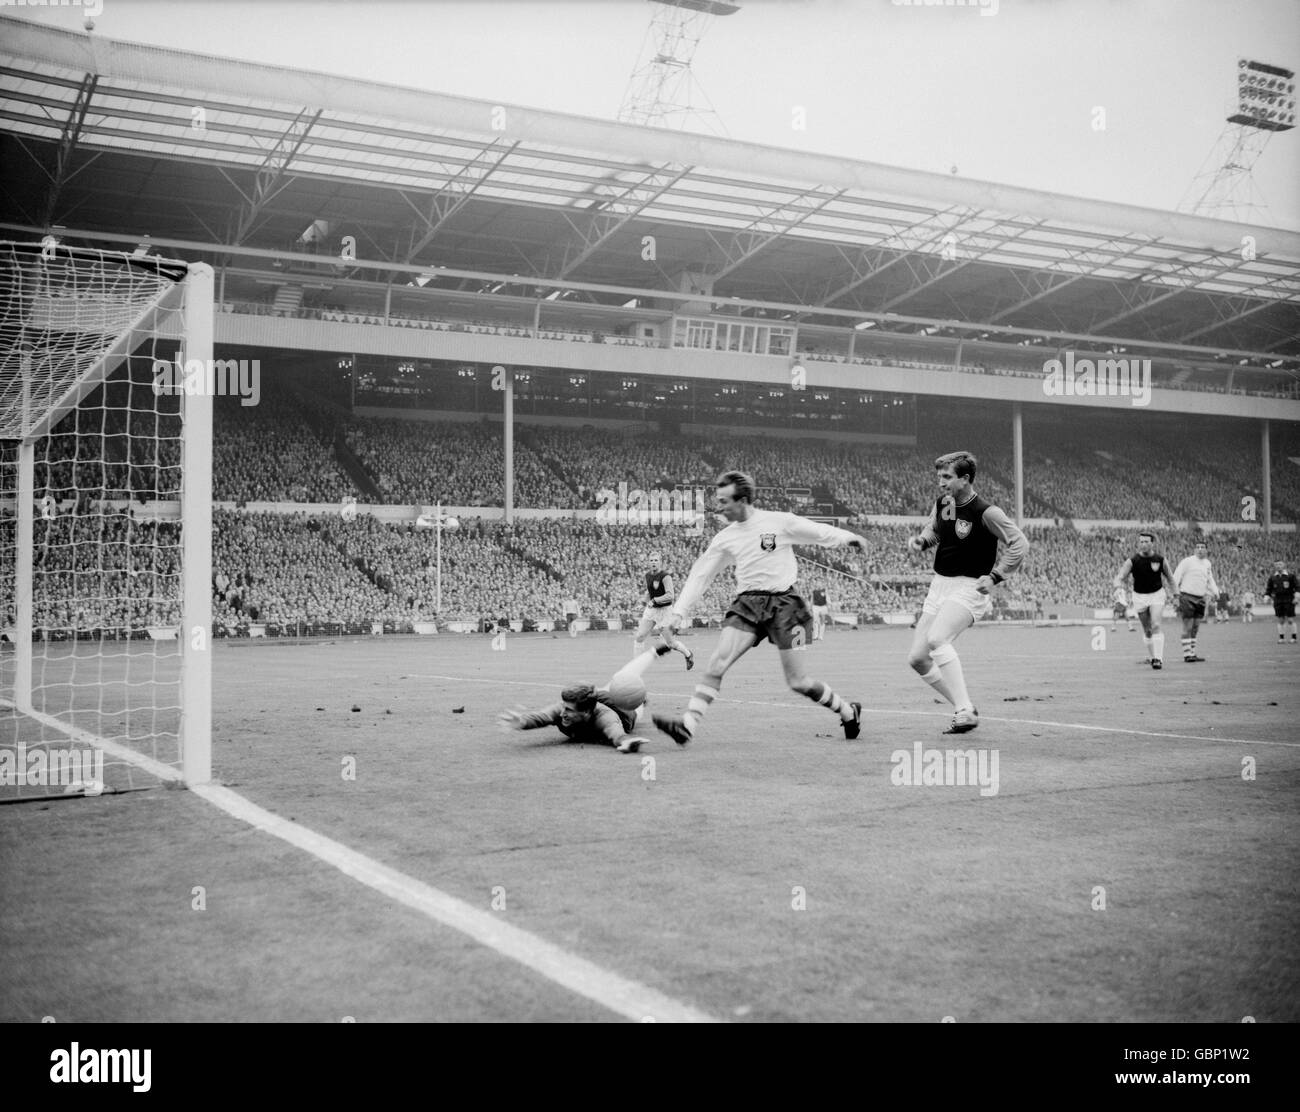 Preston North End's Doug Holden (c) beats West Ham United's Jim Standen (l) and John Bond (r) to score the opening goal Stock Photo